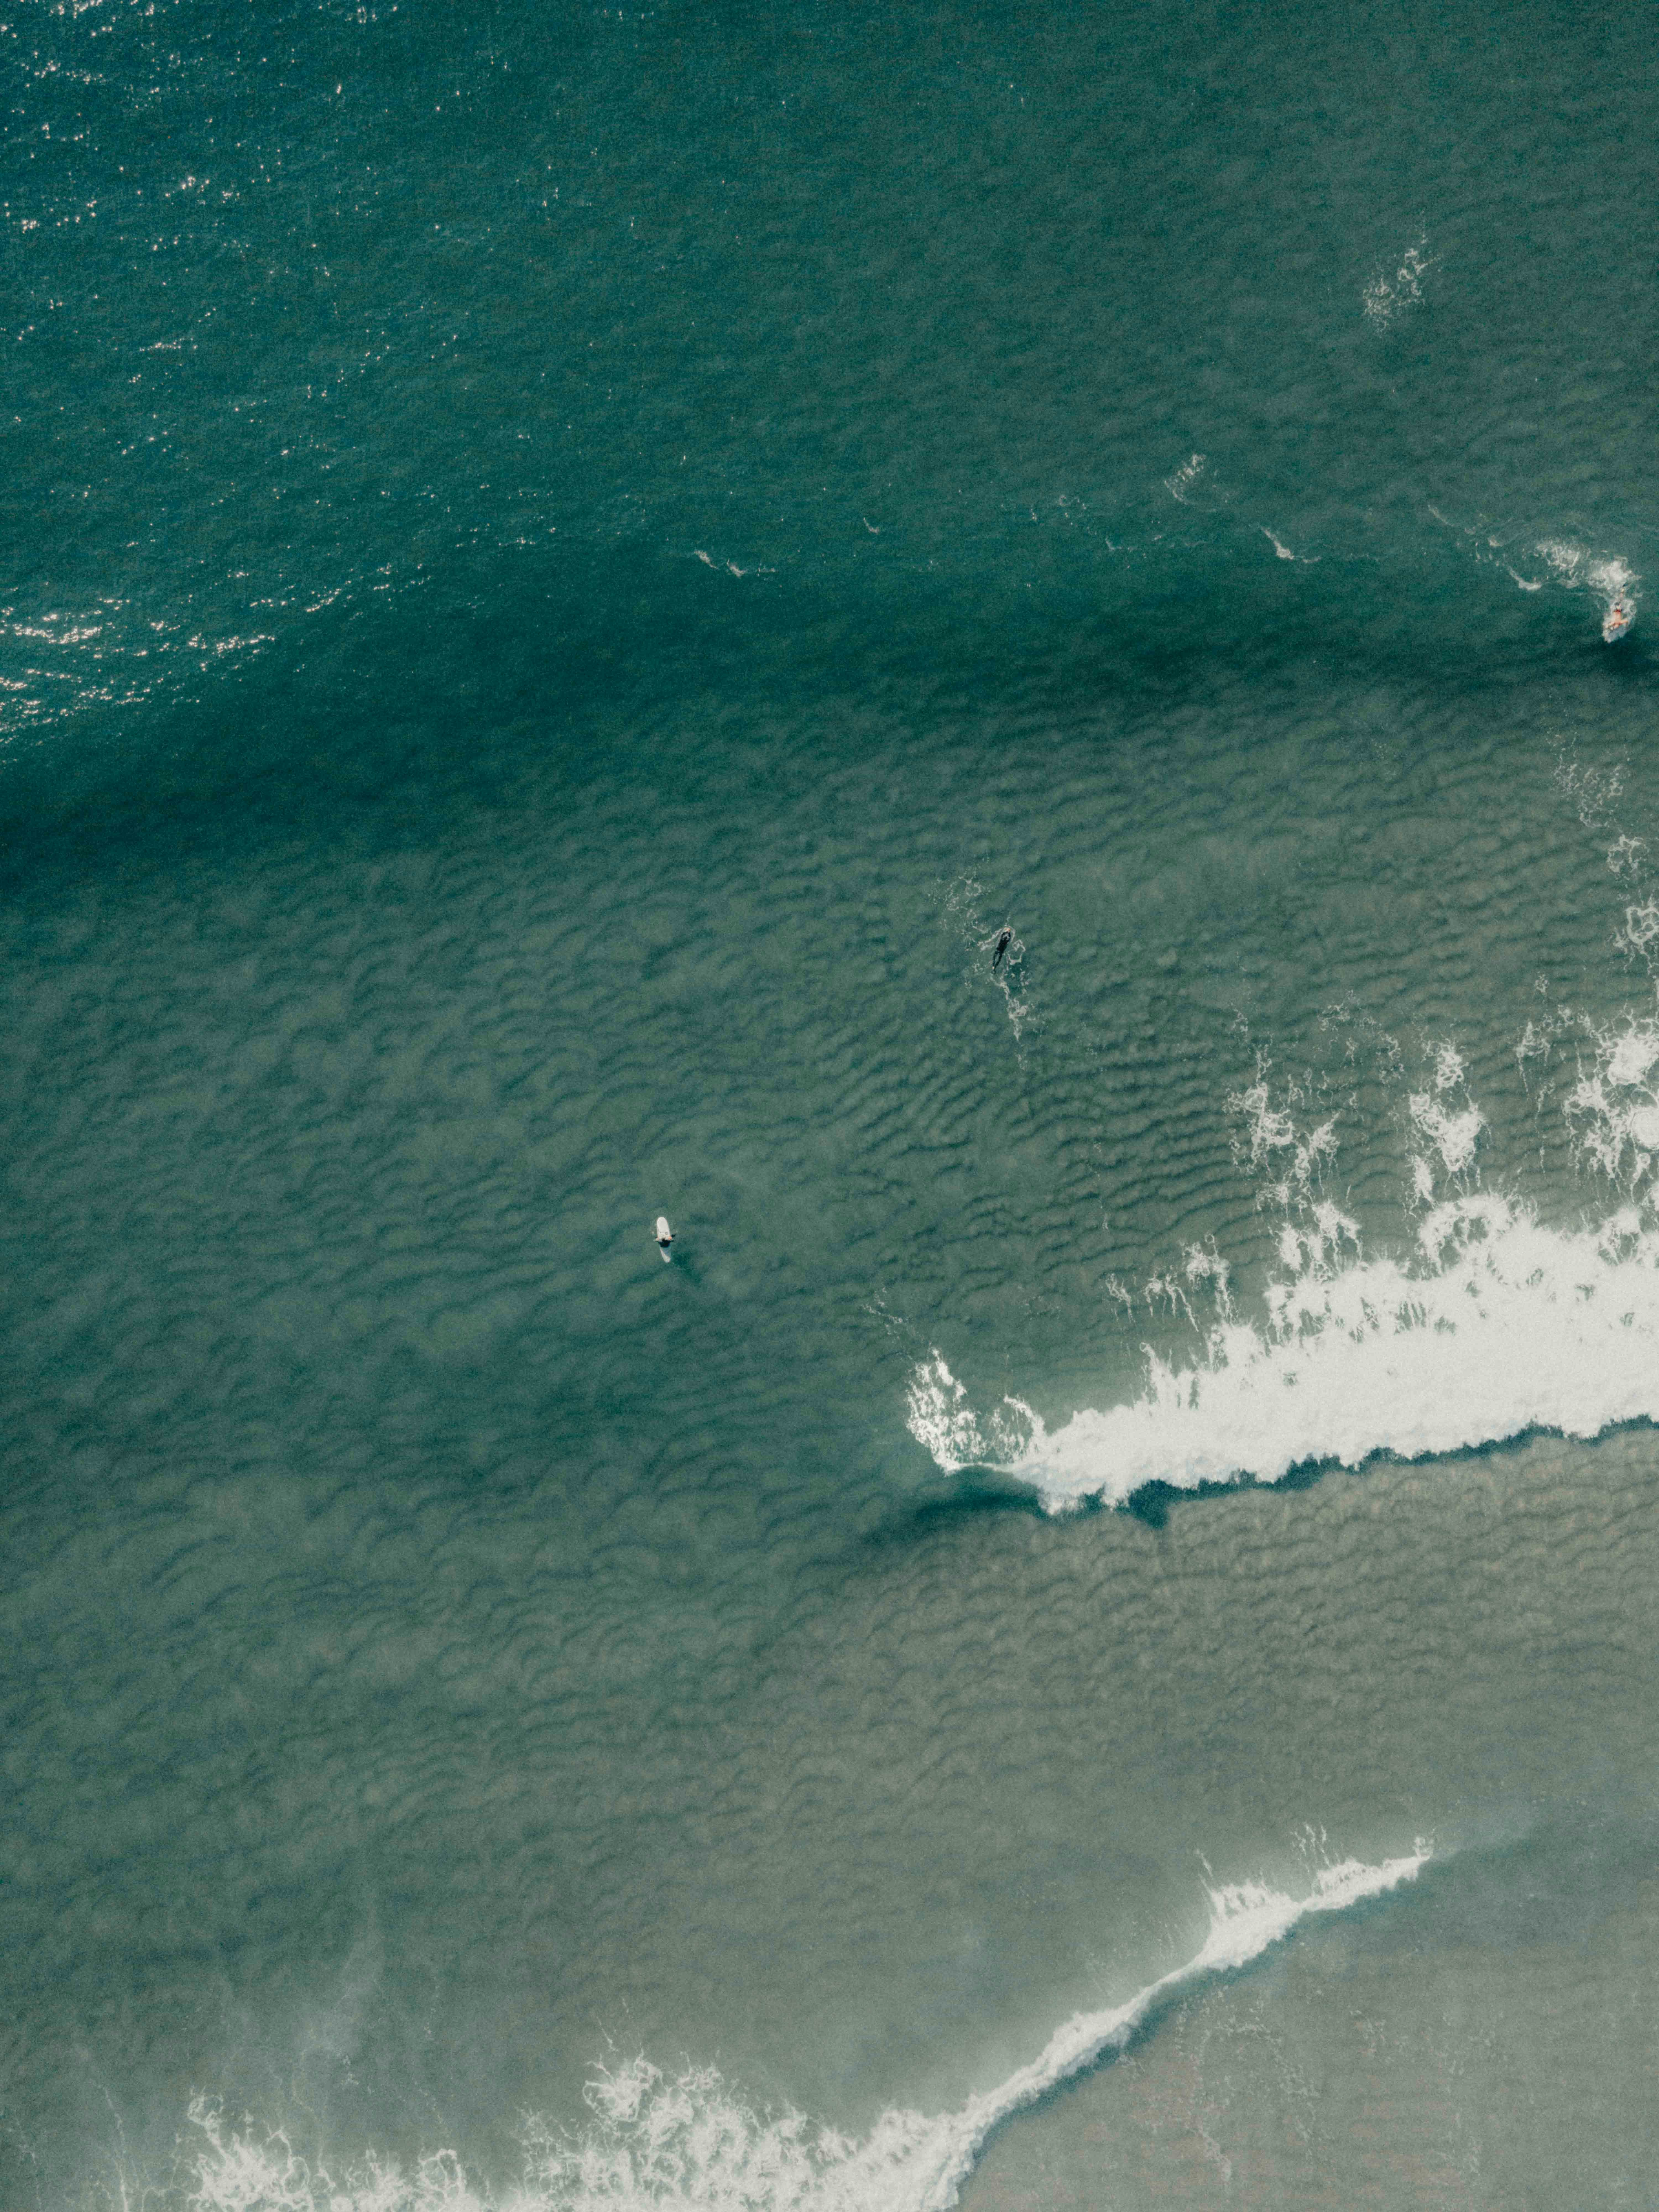 Drone shot of surfers Follow me on Instagram for more: @sir.simo